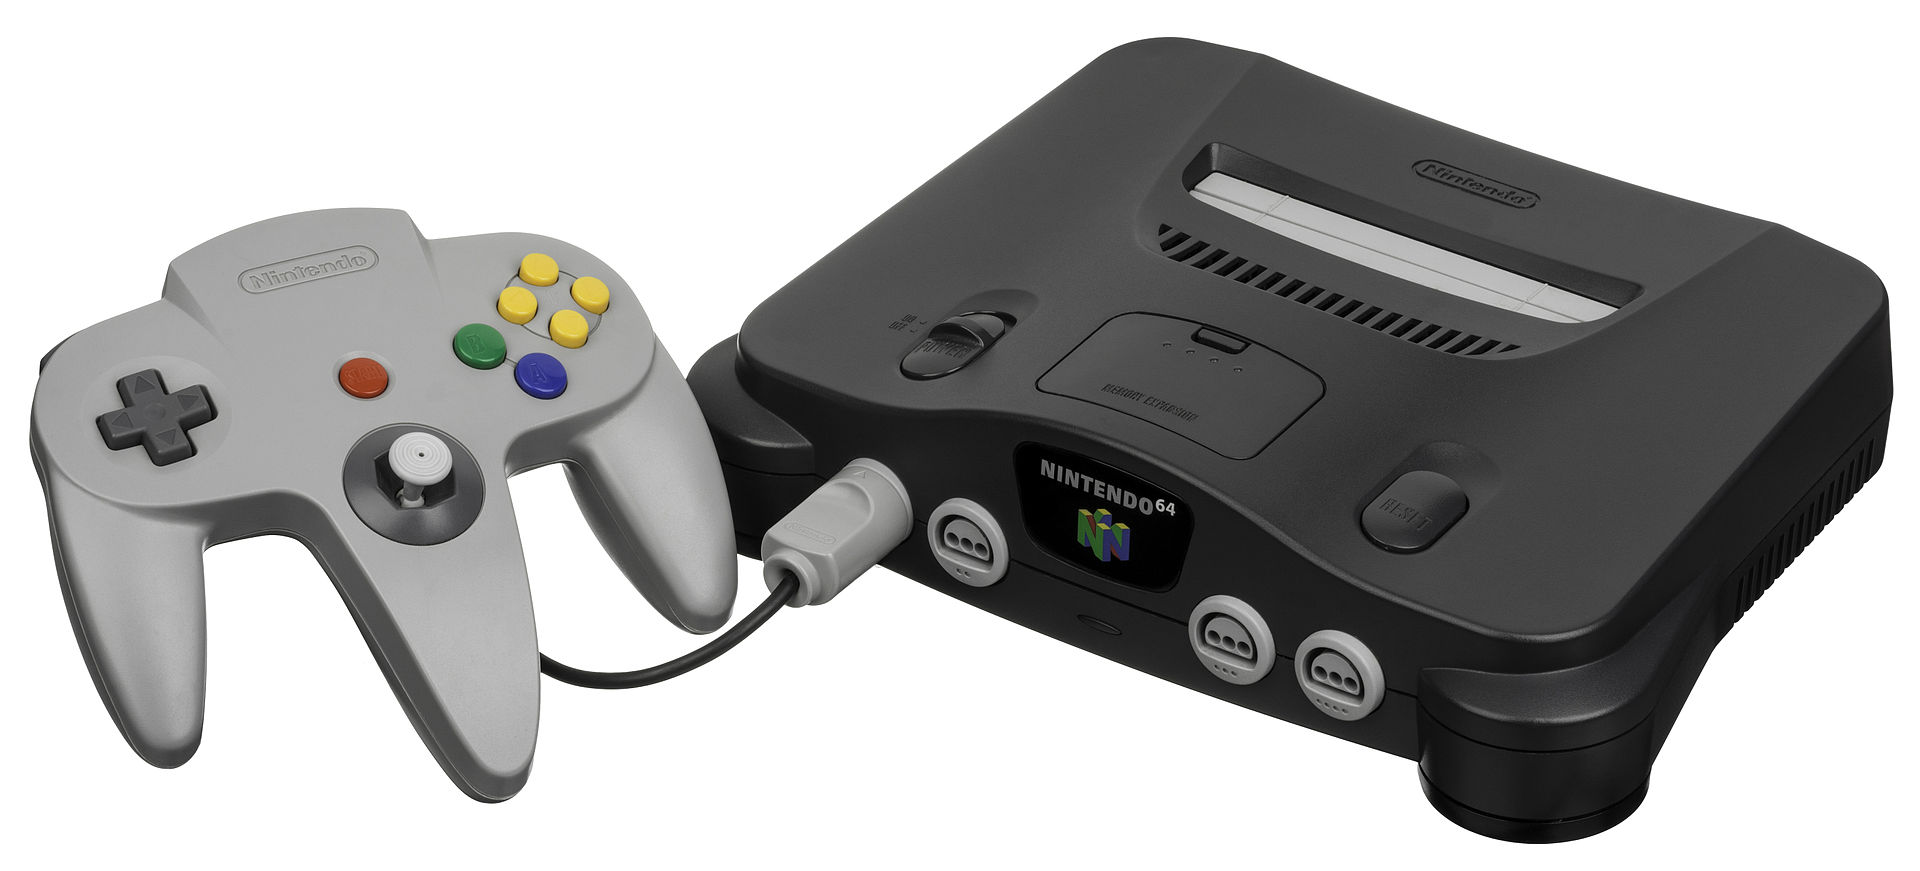 nintendo n64 roms, games and ISOs to download for free